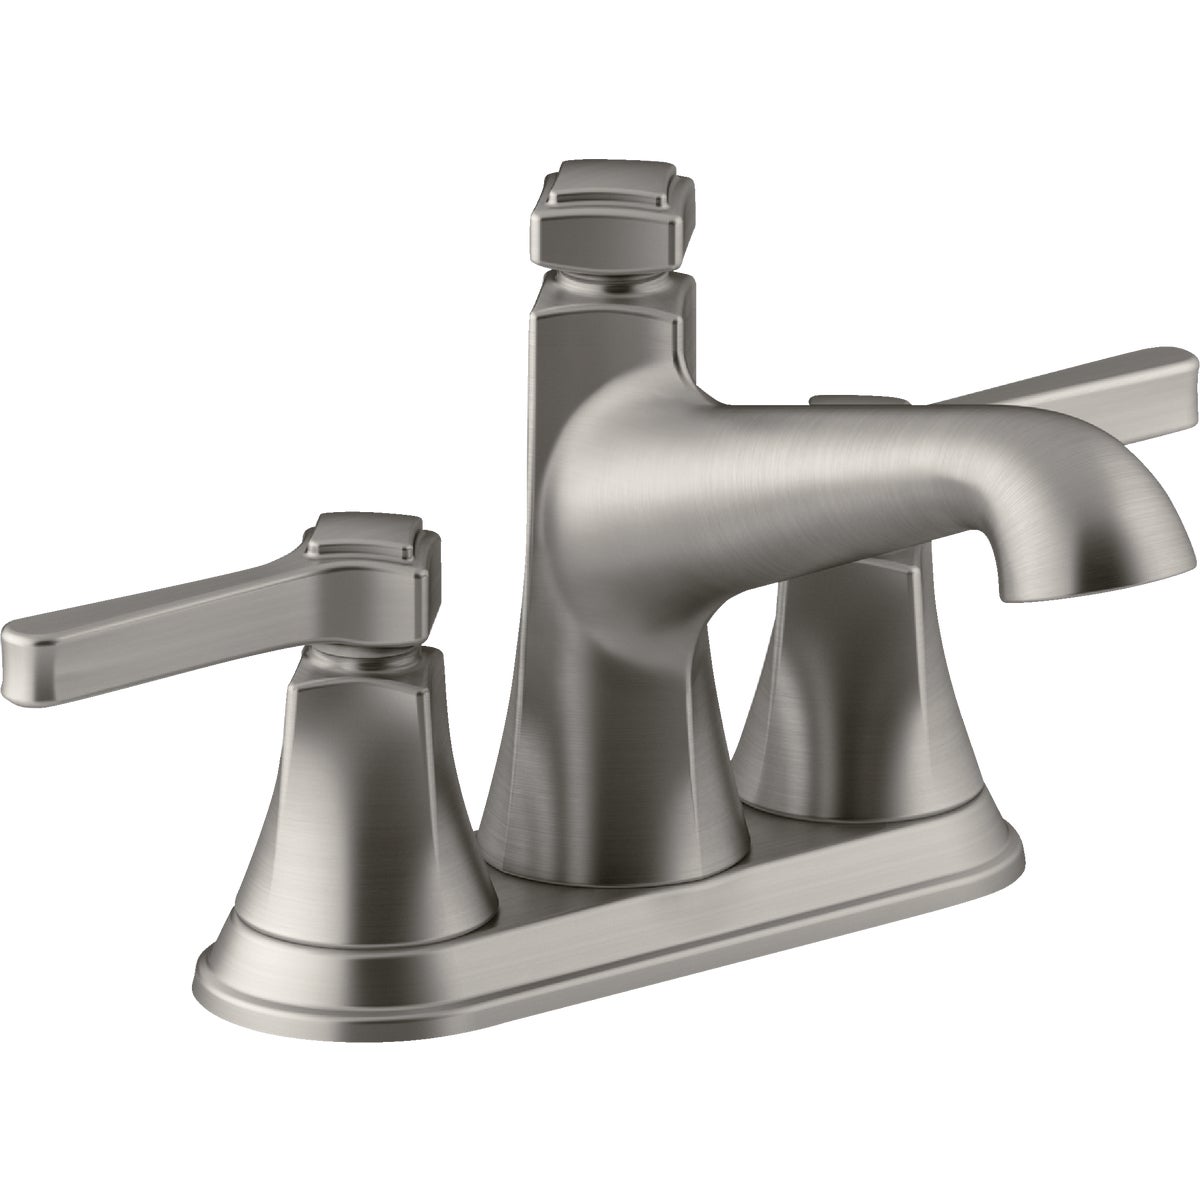 Kohler Georgeson Brushed Nickel 2-Handle Lever 4 In. Centerset Bathroom Faucet with Pop-Up